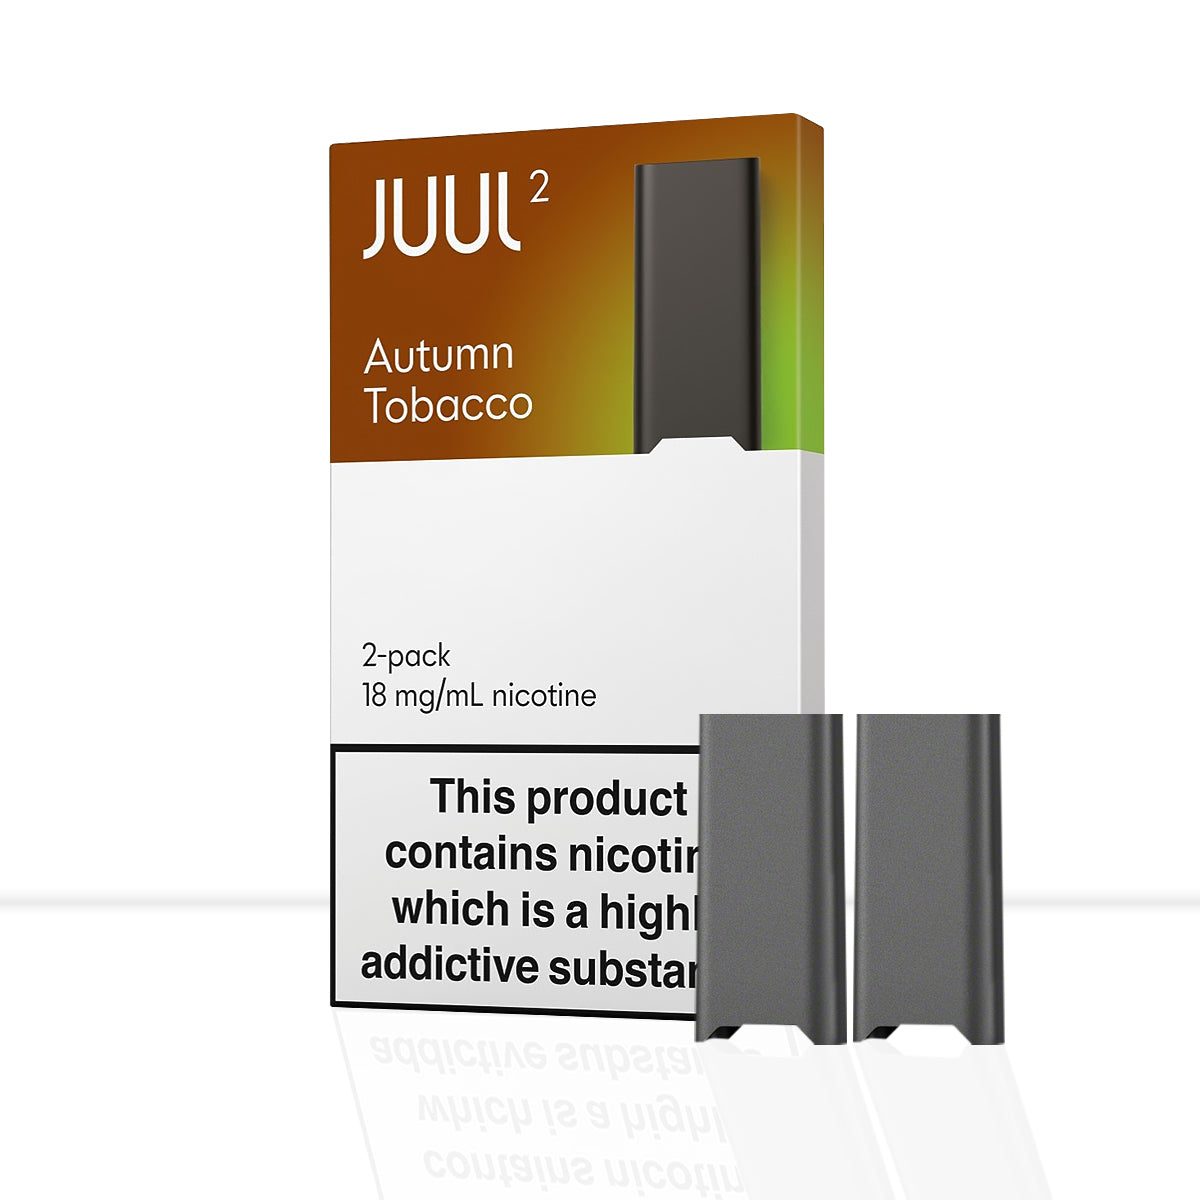 Autumn Tobacco: Brown and Green Juul2 Pods